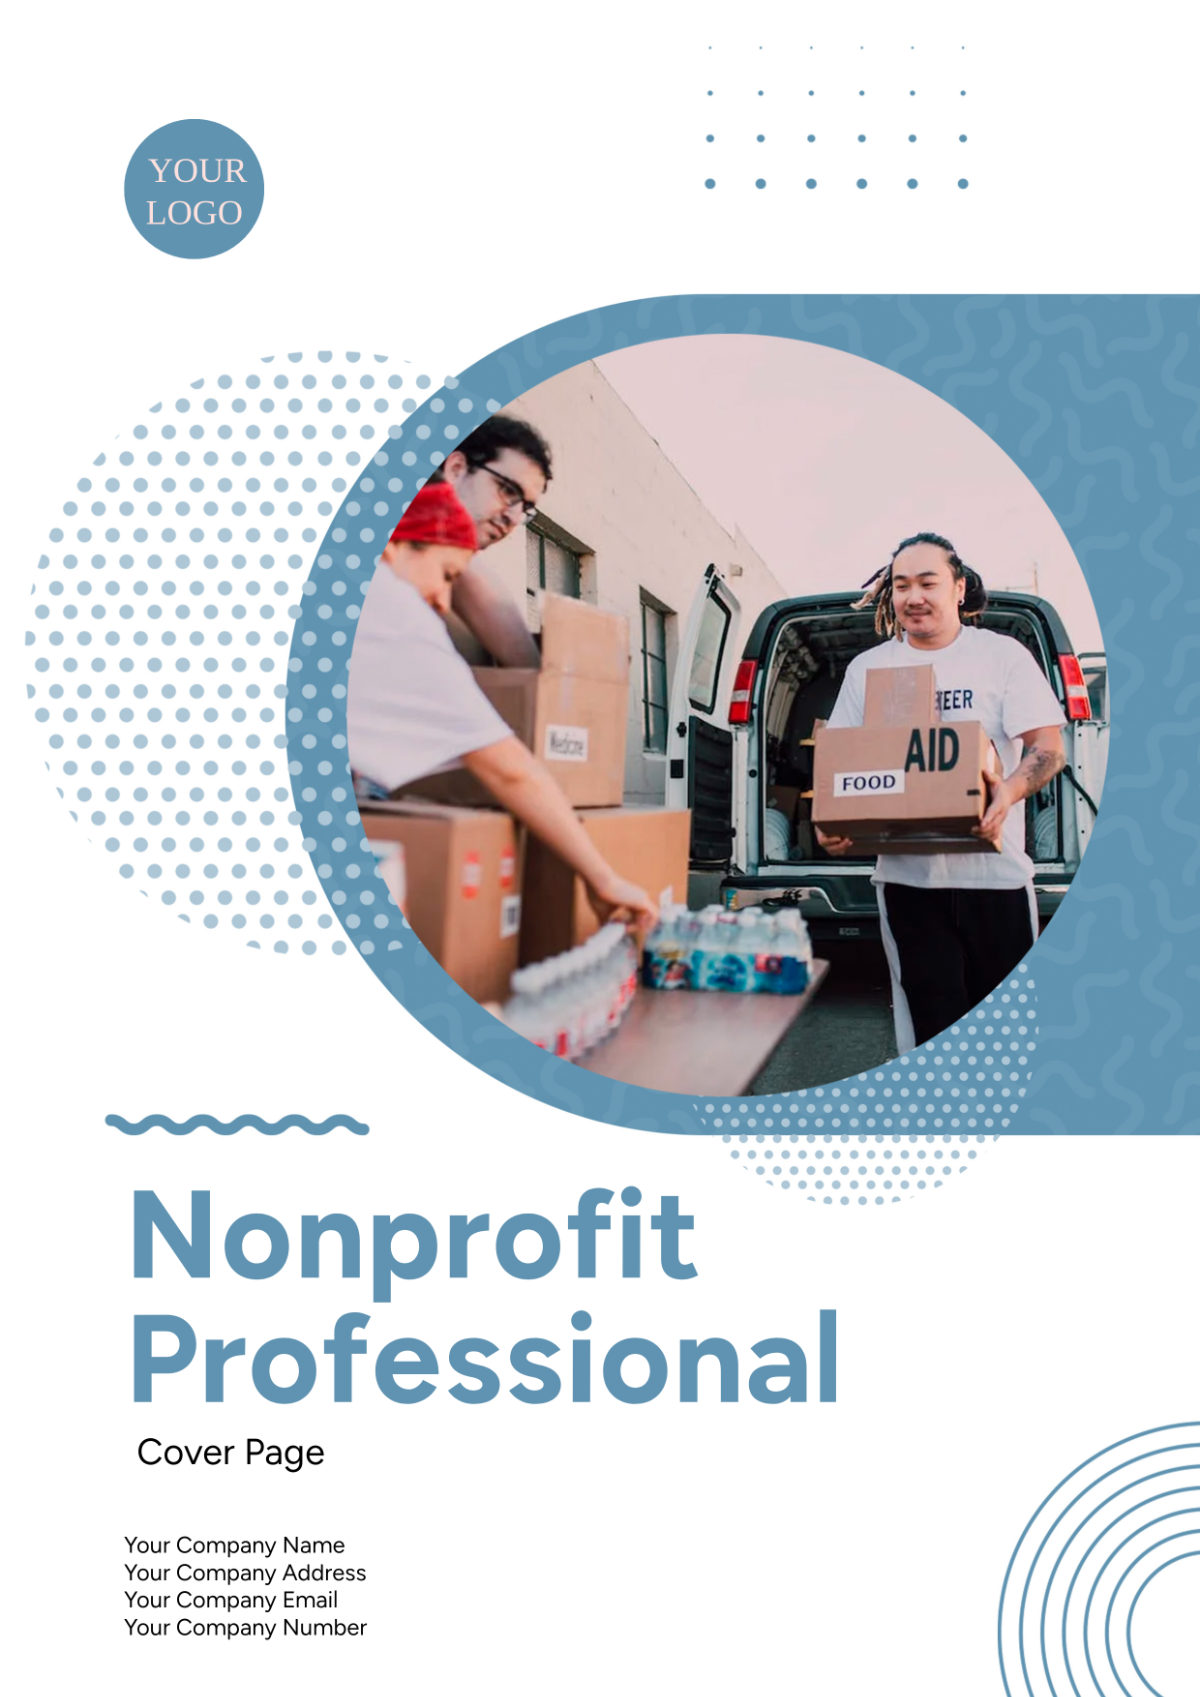 Nonprofit Professional Cover Page